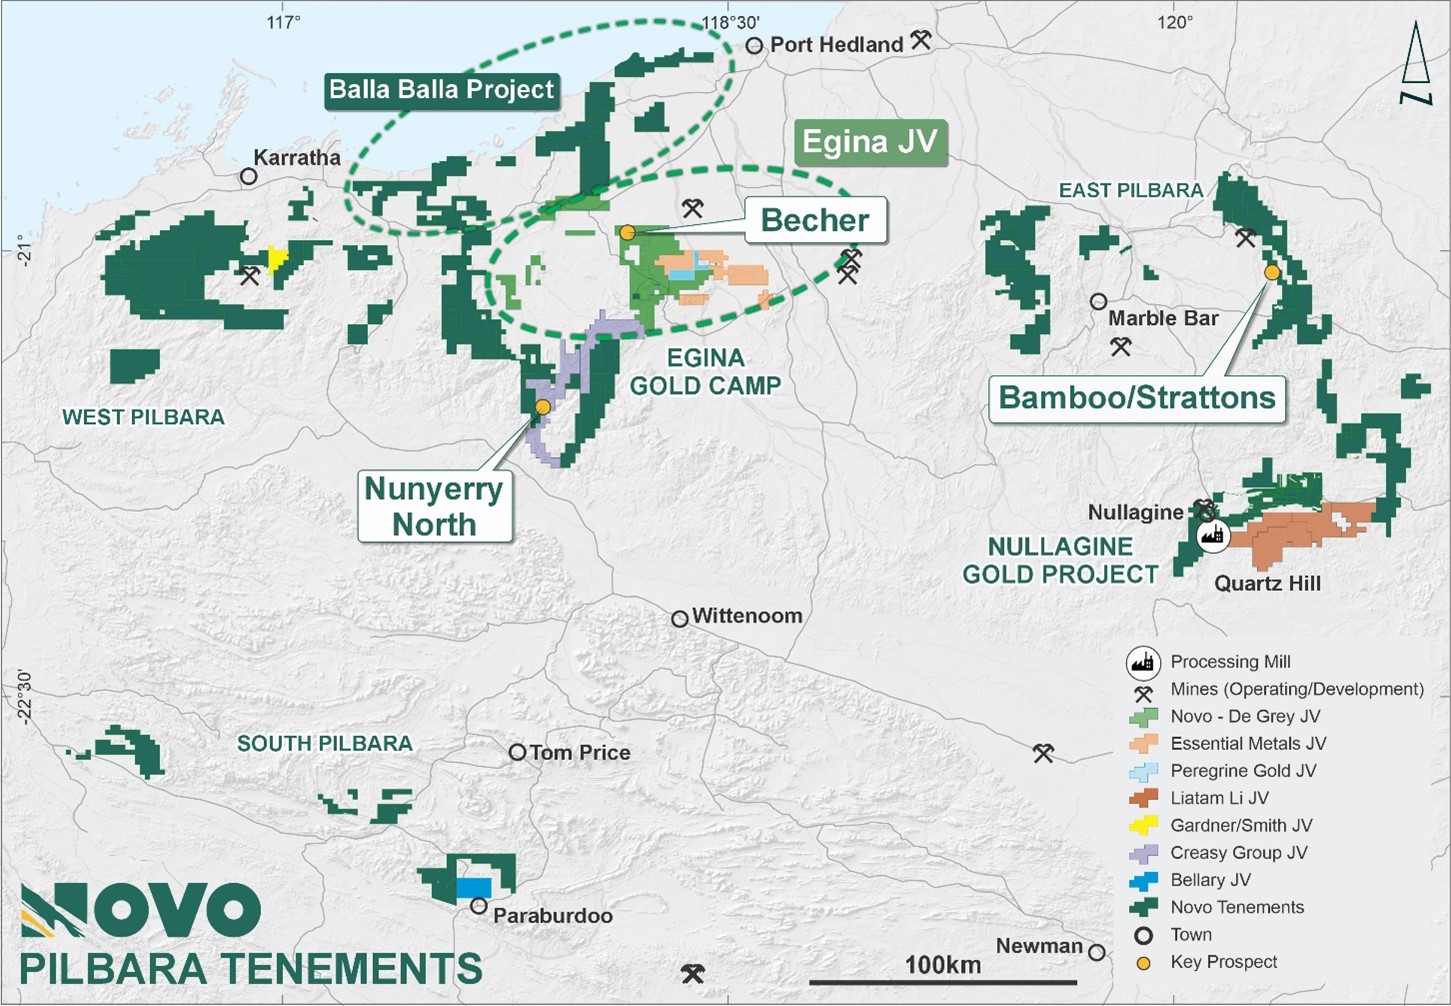 Novo’s Pilbara tenure, showing priority prospects and joint venture interests.